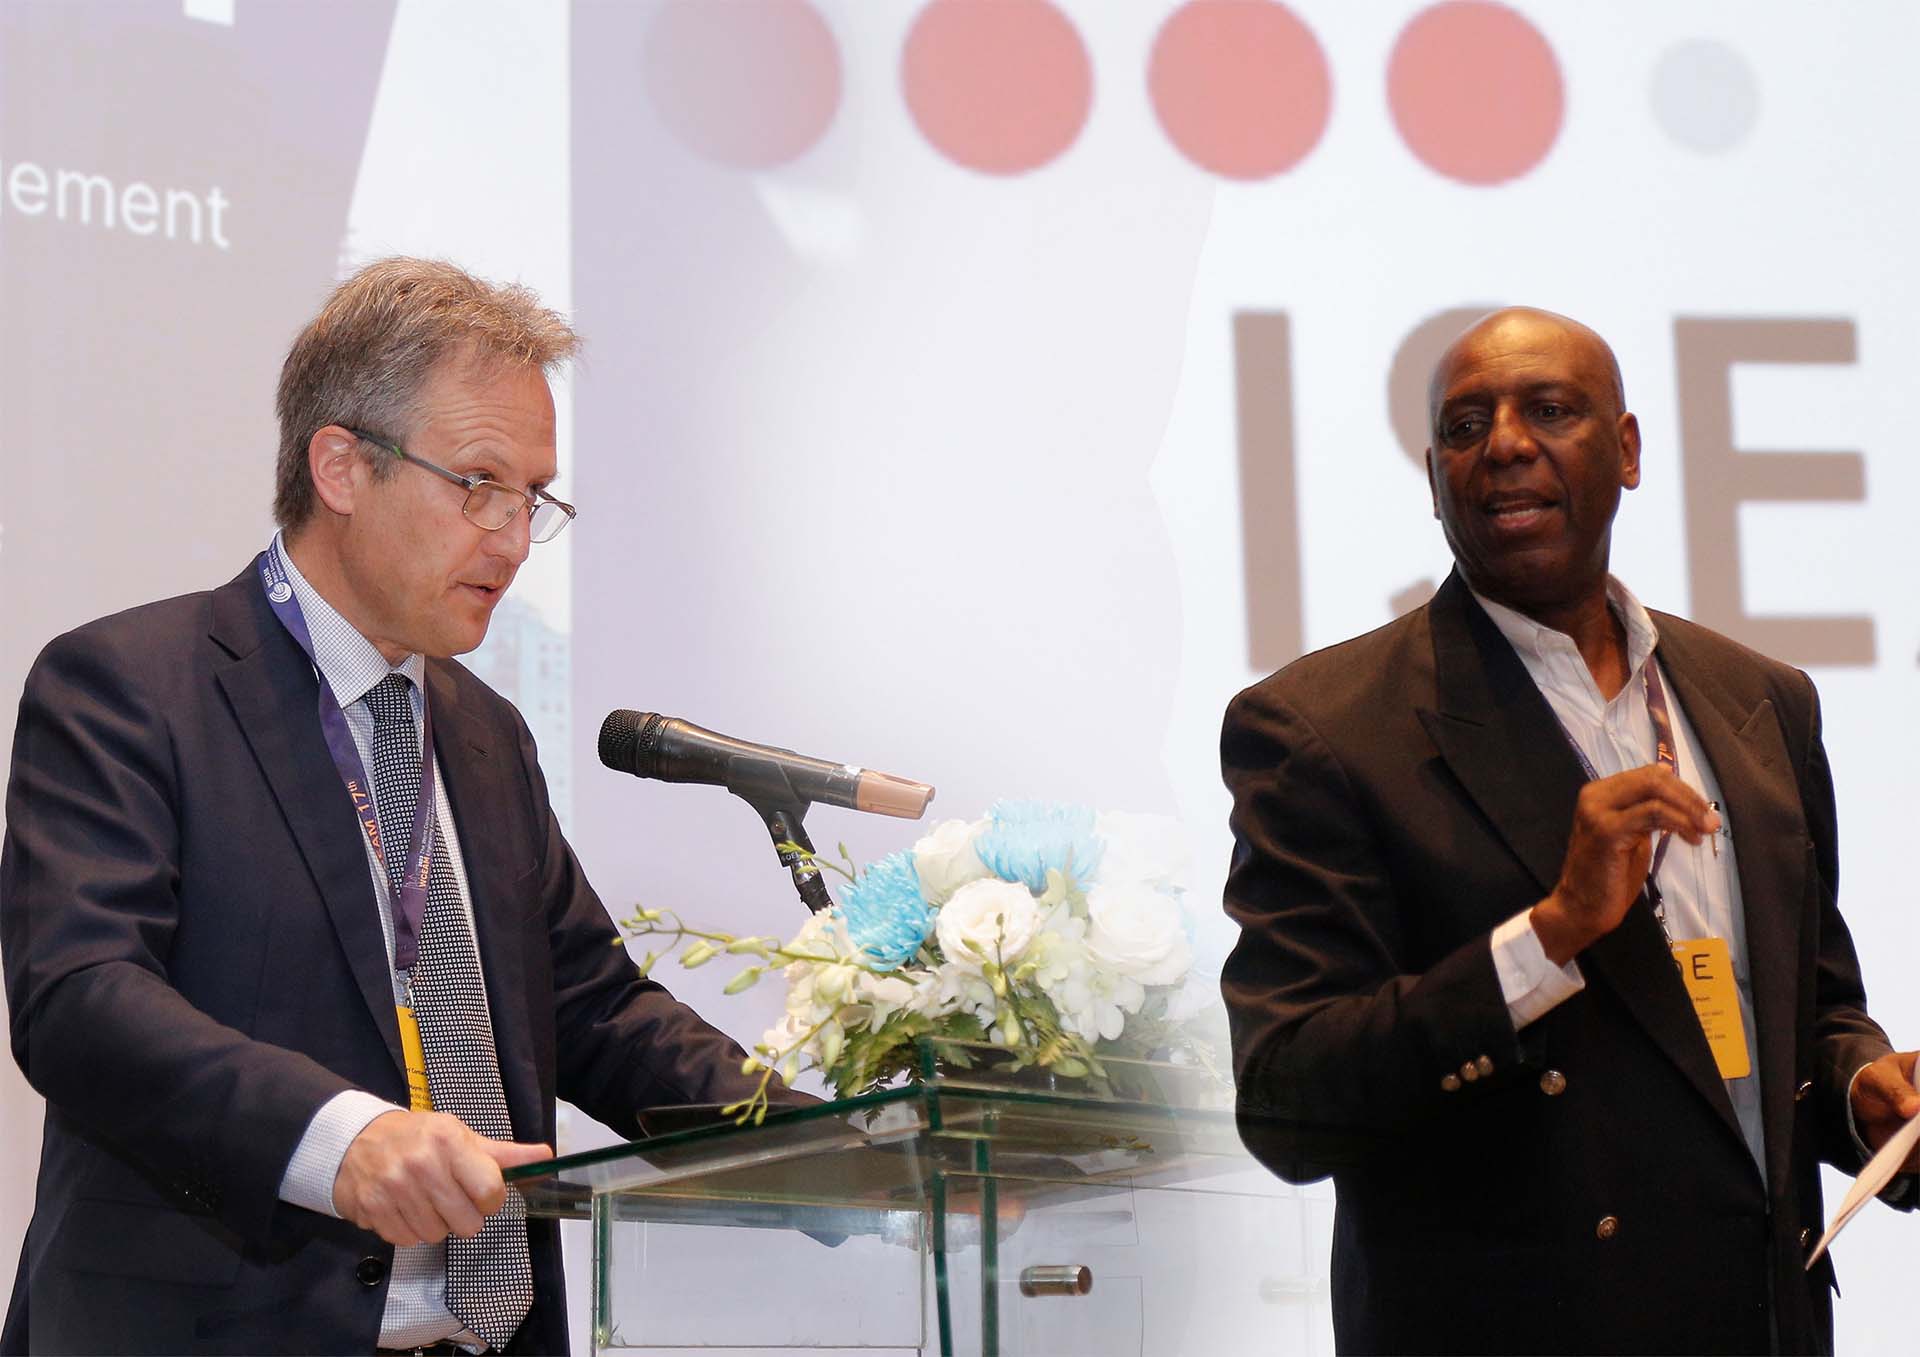 Professor Ray Kirby and Professor Joe Amadi-Echendu delivered welcome addresses at the Opening ceremony.